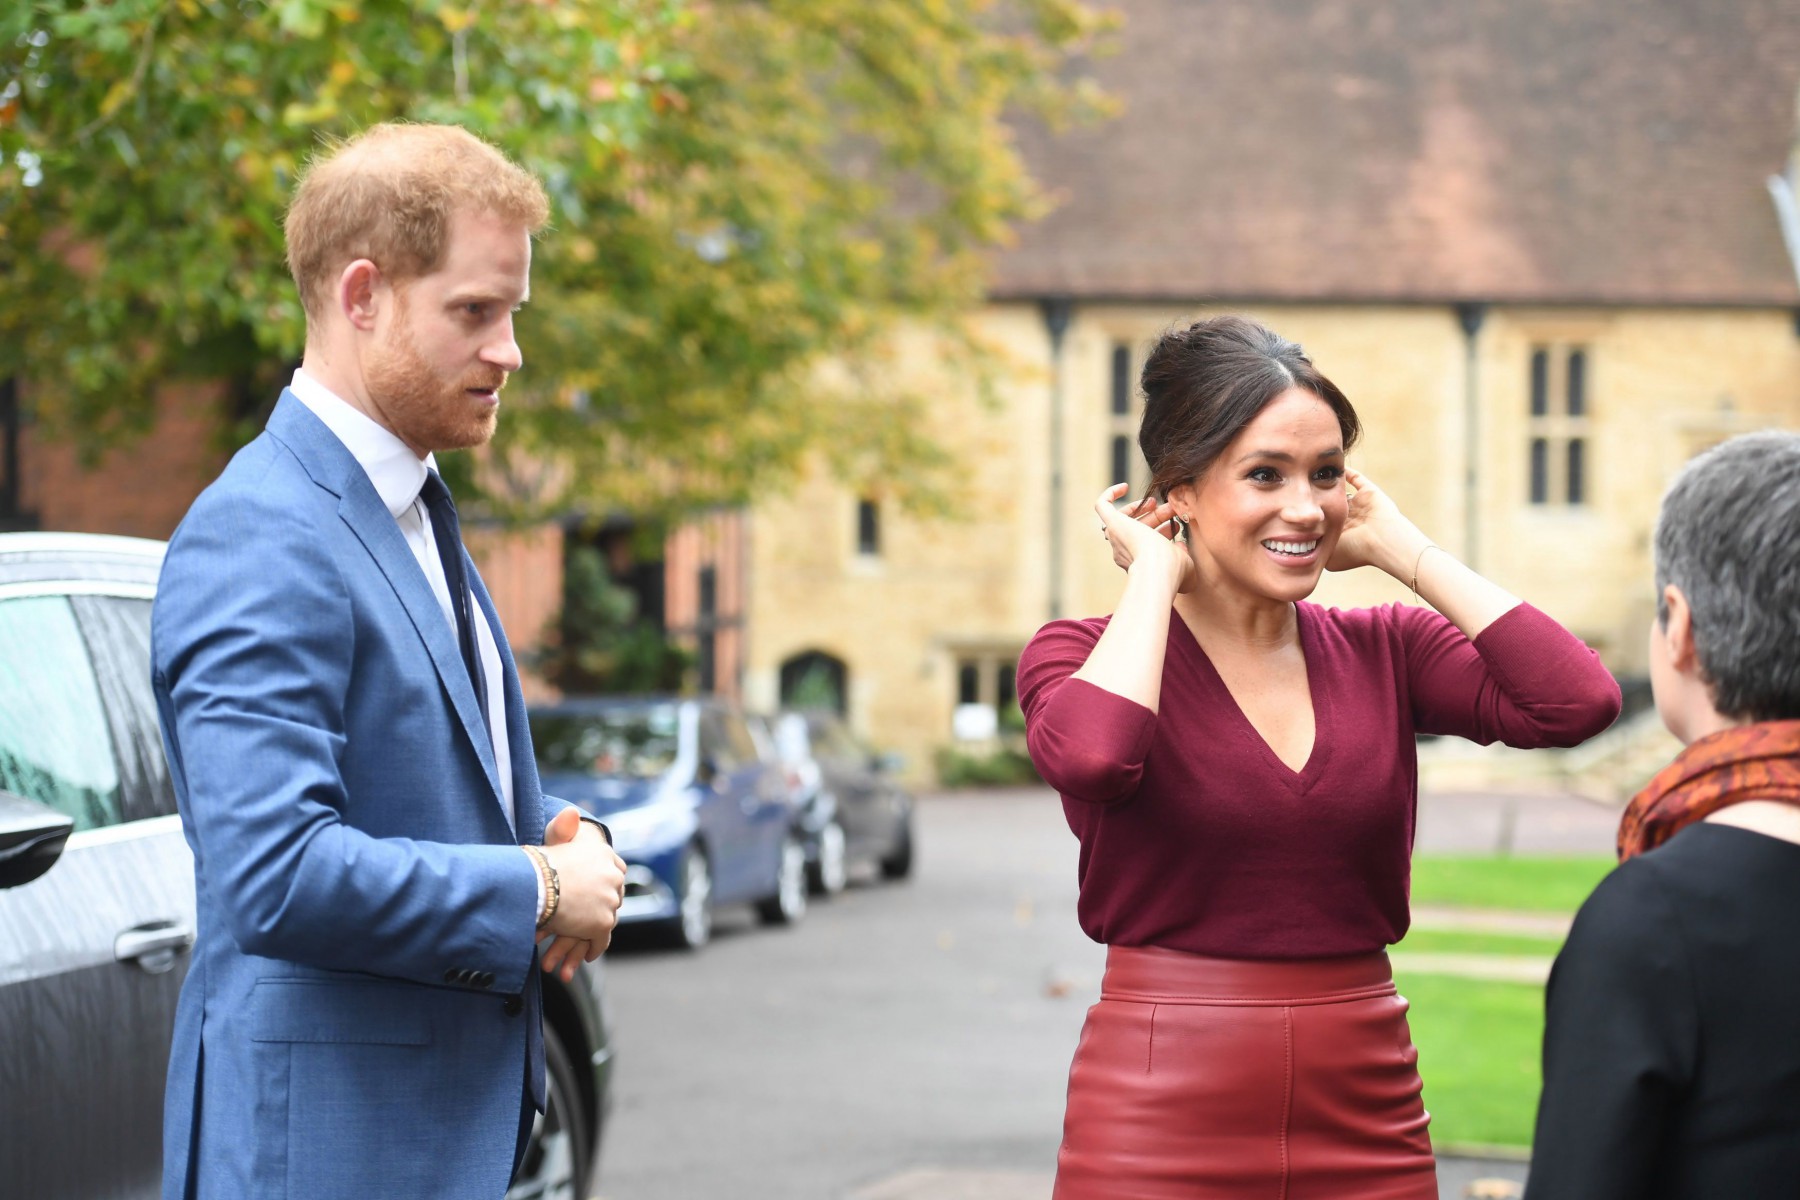 Meghan Markle and Prince Harry arrive at Windsor Castle this morning